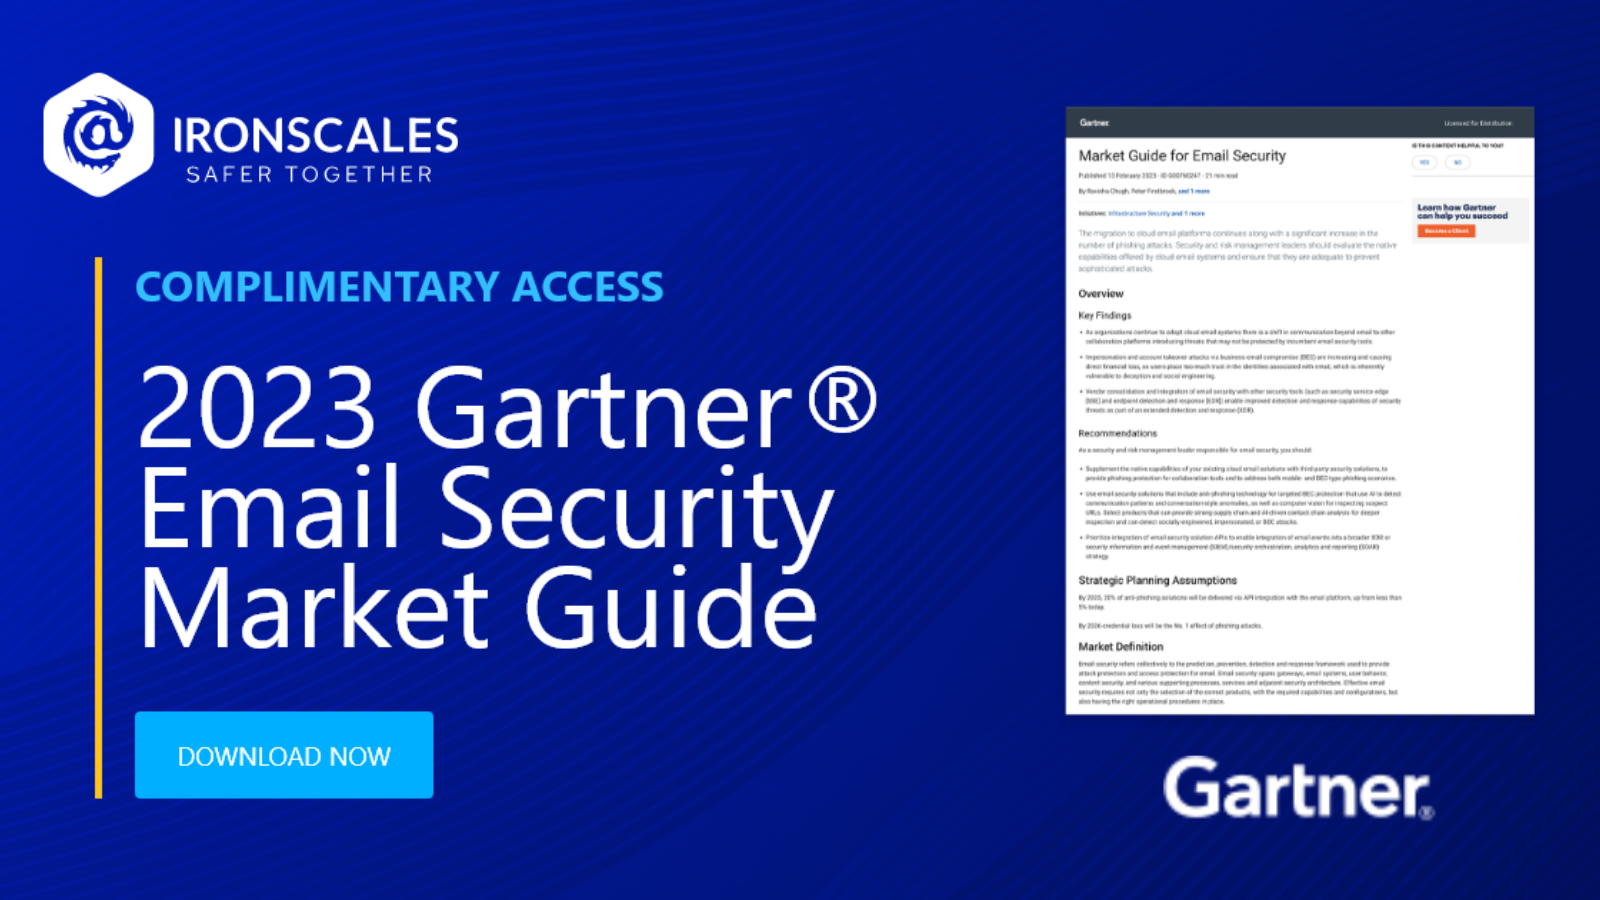 2023 Gartner® Email Security Market Guide IRONSCALES